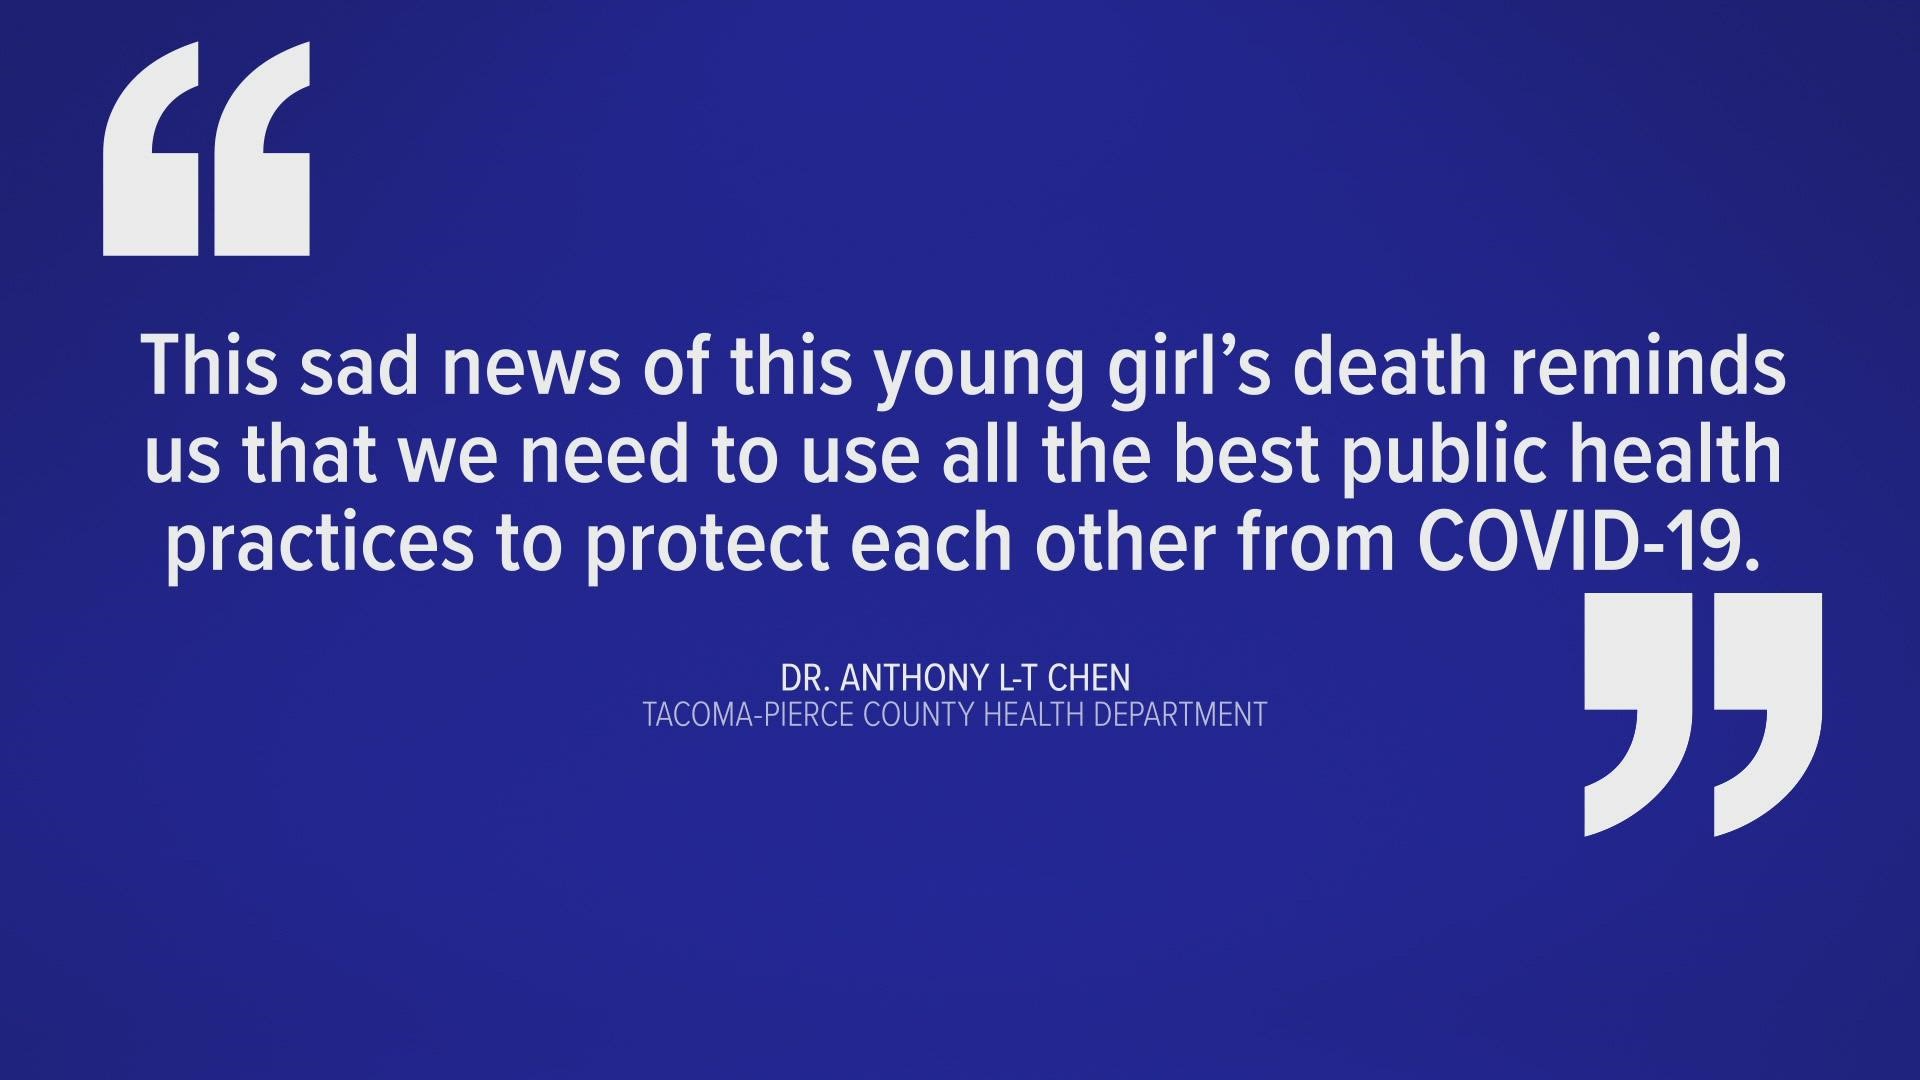 A Lakewood girl under 10 years of age has become the first child to die due to COVID-19 in Pierce County, health officials reported Friday.